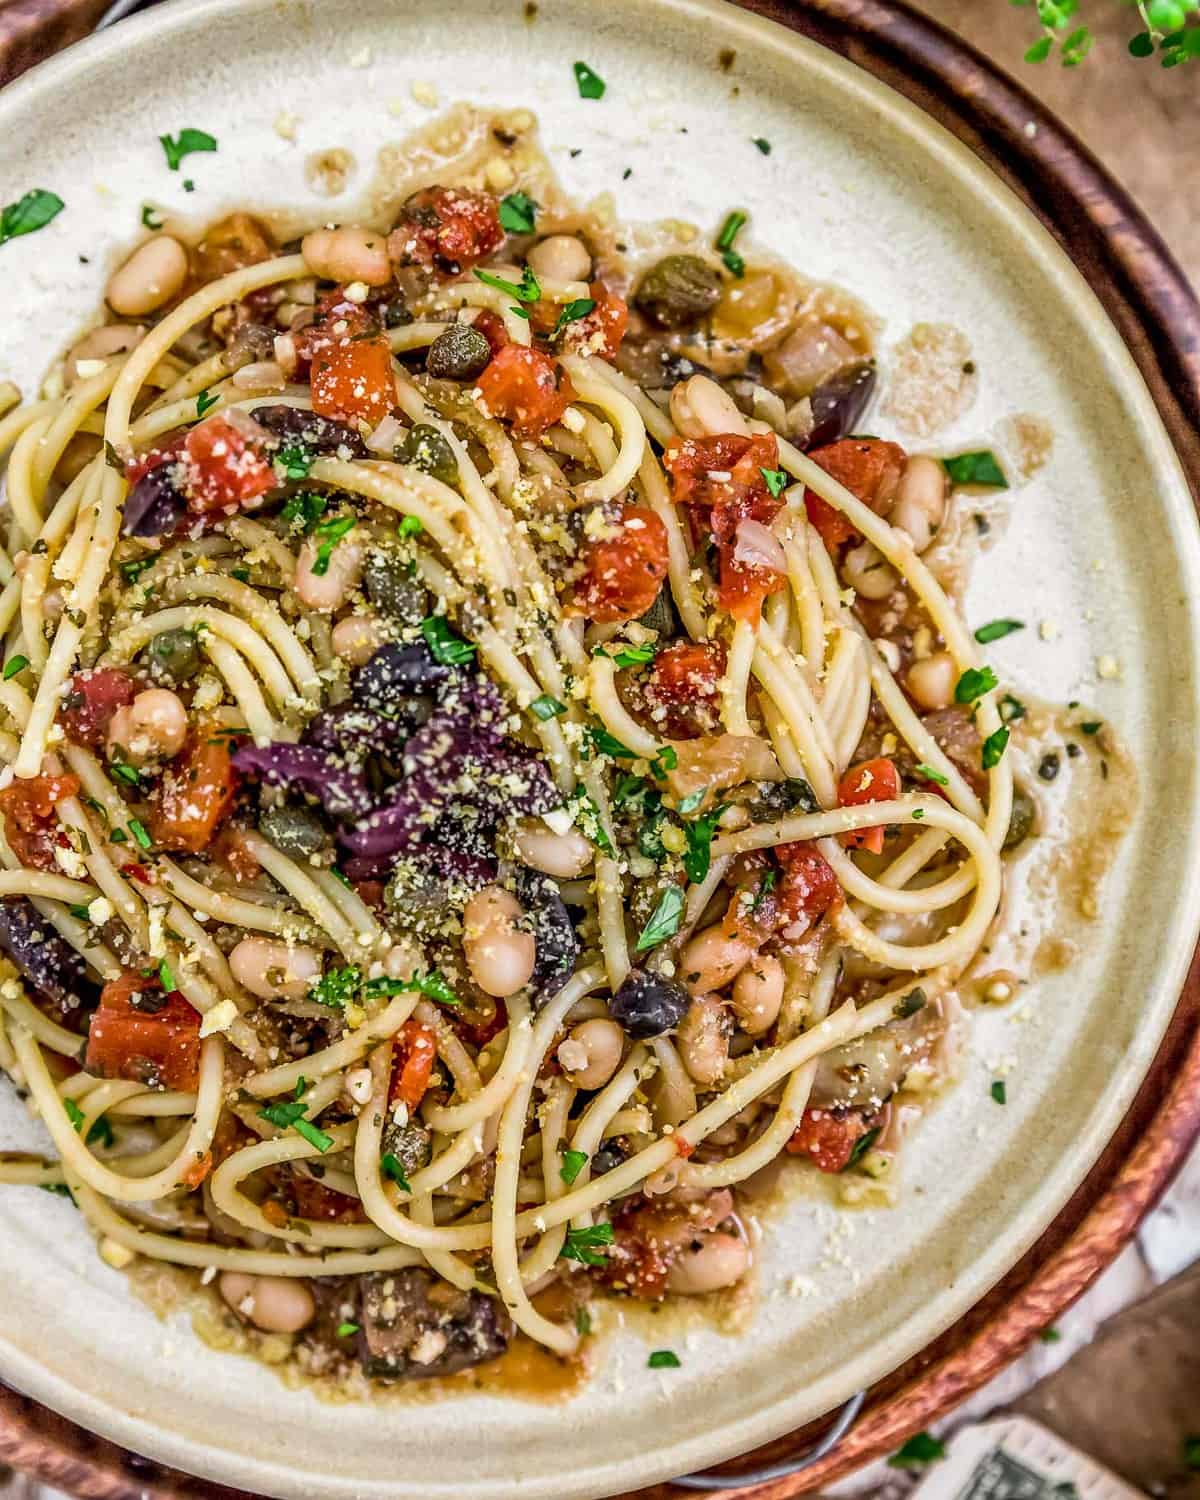 Delight Your Taste Buds with an Erotic Broth-Based Pasta Dish